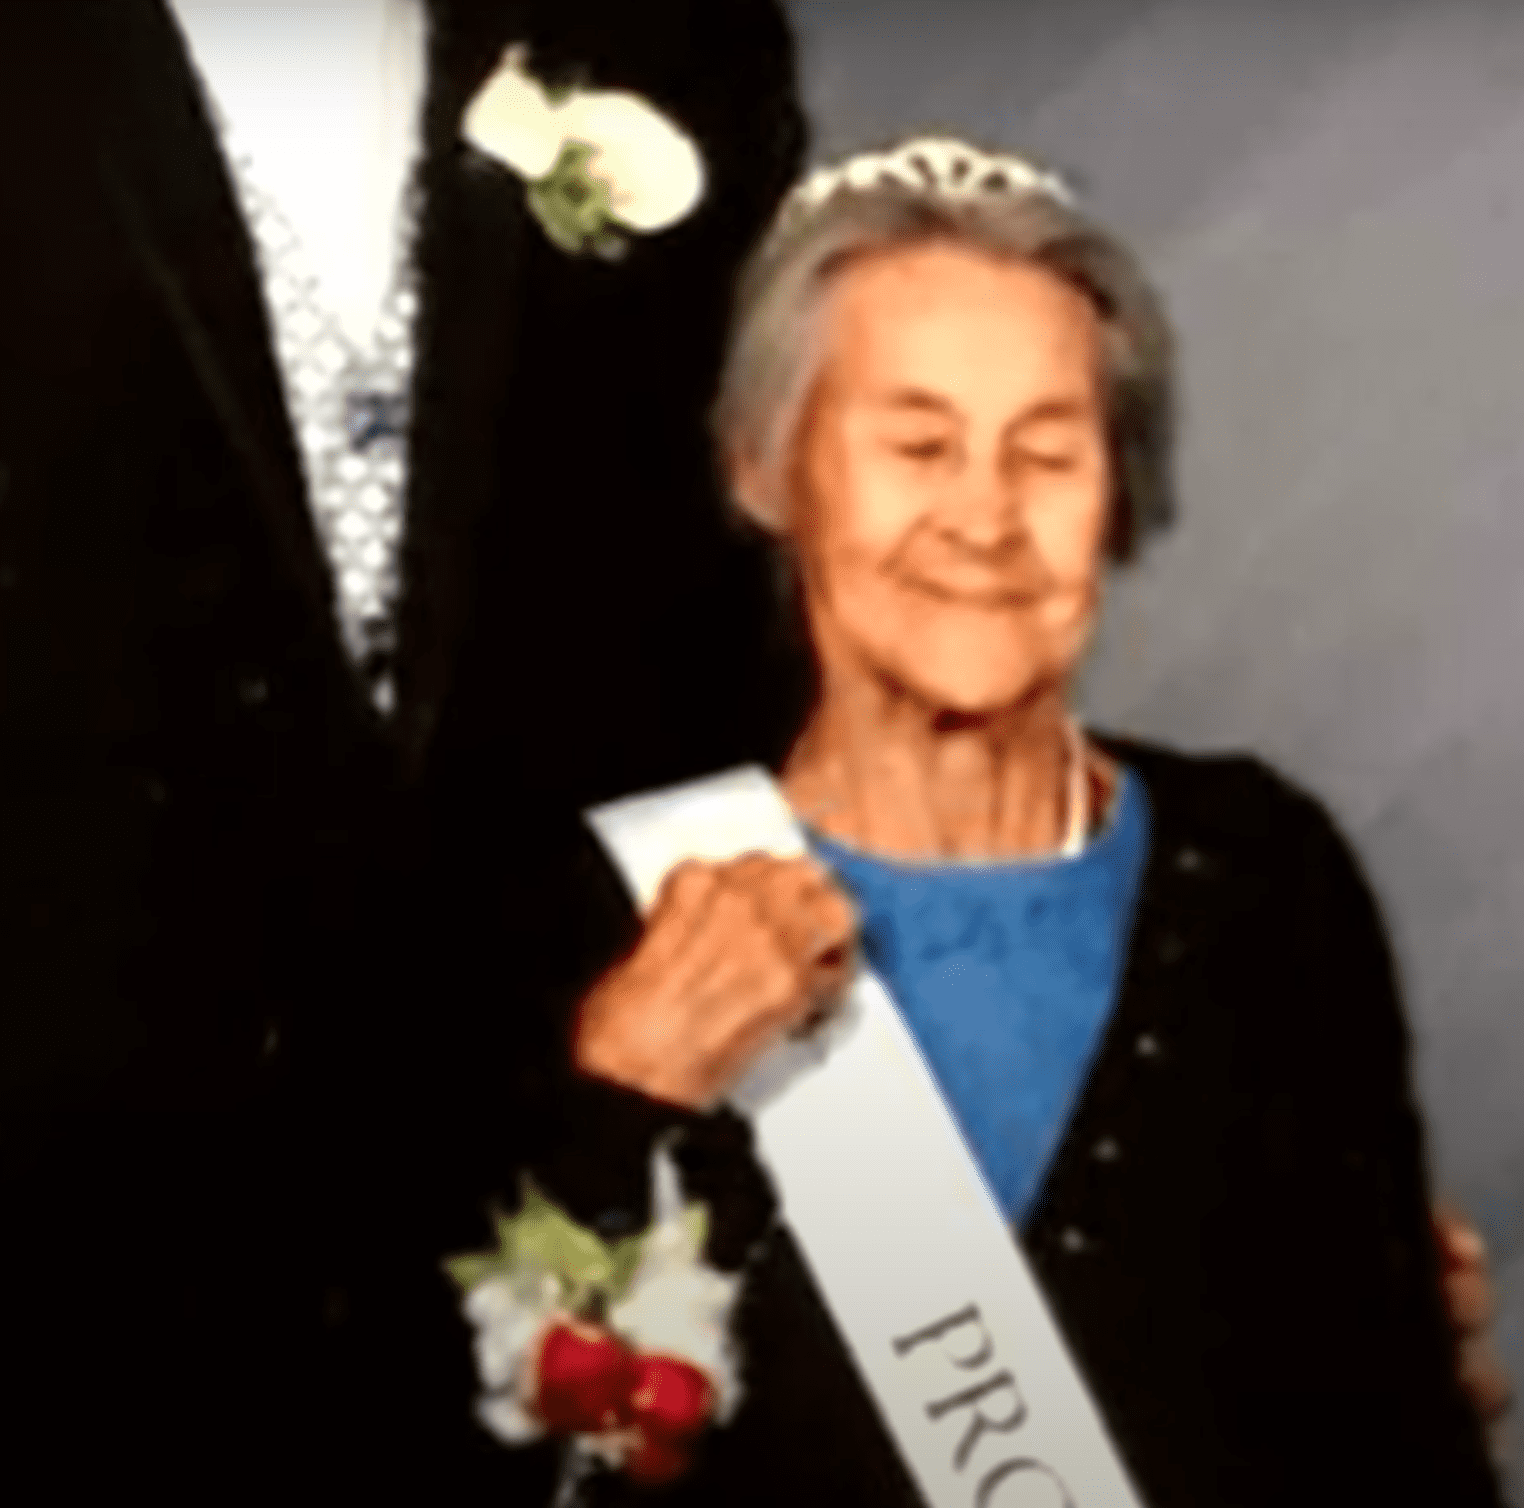 Terminally ill grandmother has her picture taken at her grandson's prom | Photo: Youtube/Inside Edition